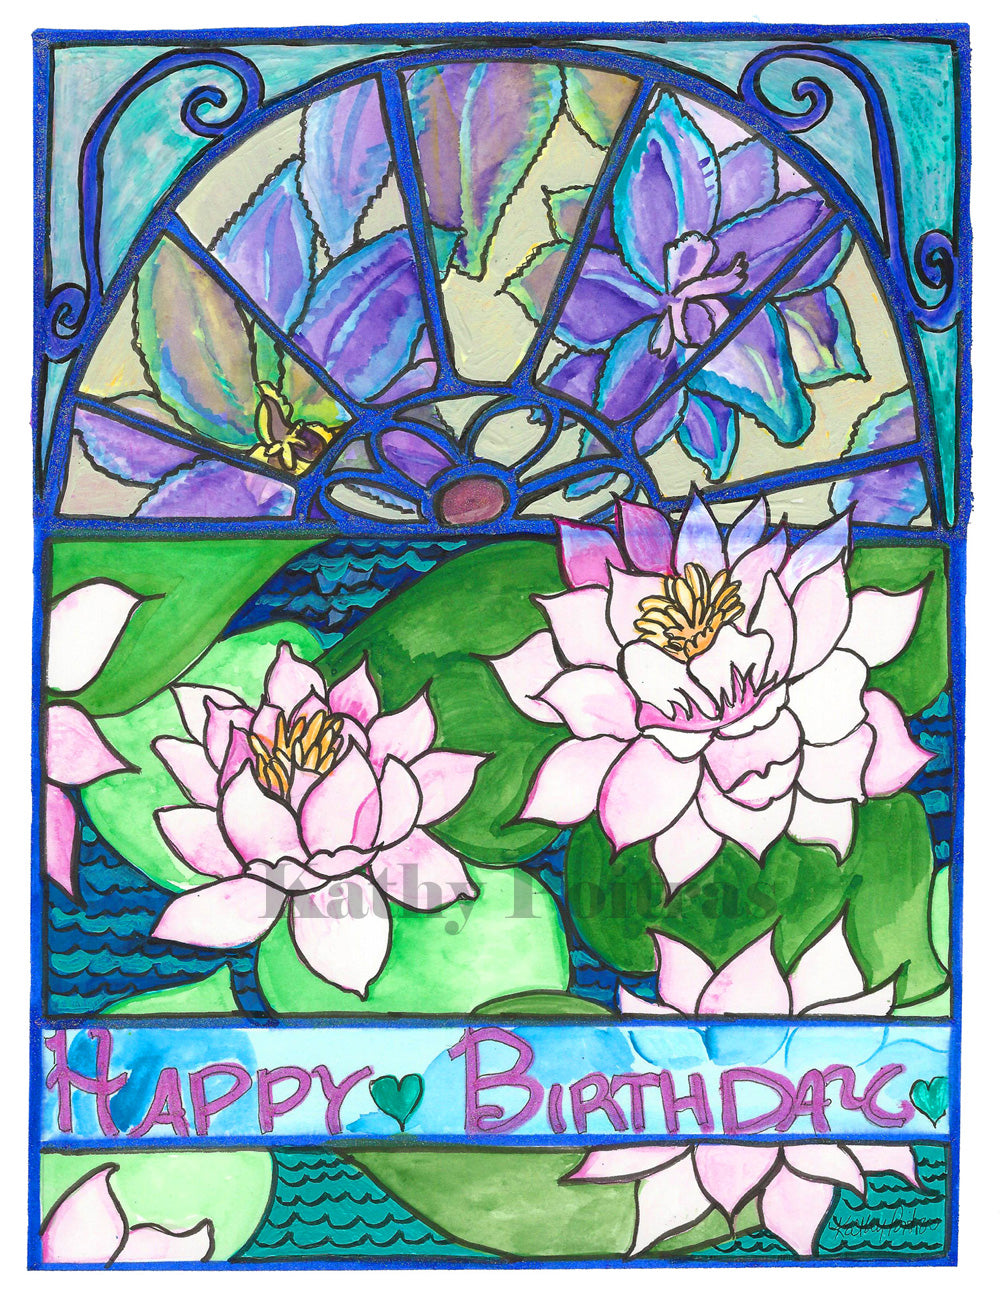 Hand made birthday card, in the naïve folk art style of Kathy Poitras. Inspired by the July birth  flowers of the month, Waterlilies and larkspur    Inspired by stained glass windows, this image has impressions of larkspur blossoms in an arch with waterlilies below. A celebratory ribbon that says "Happy Birthday" across the bottom.